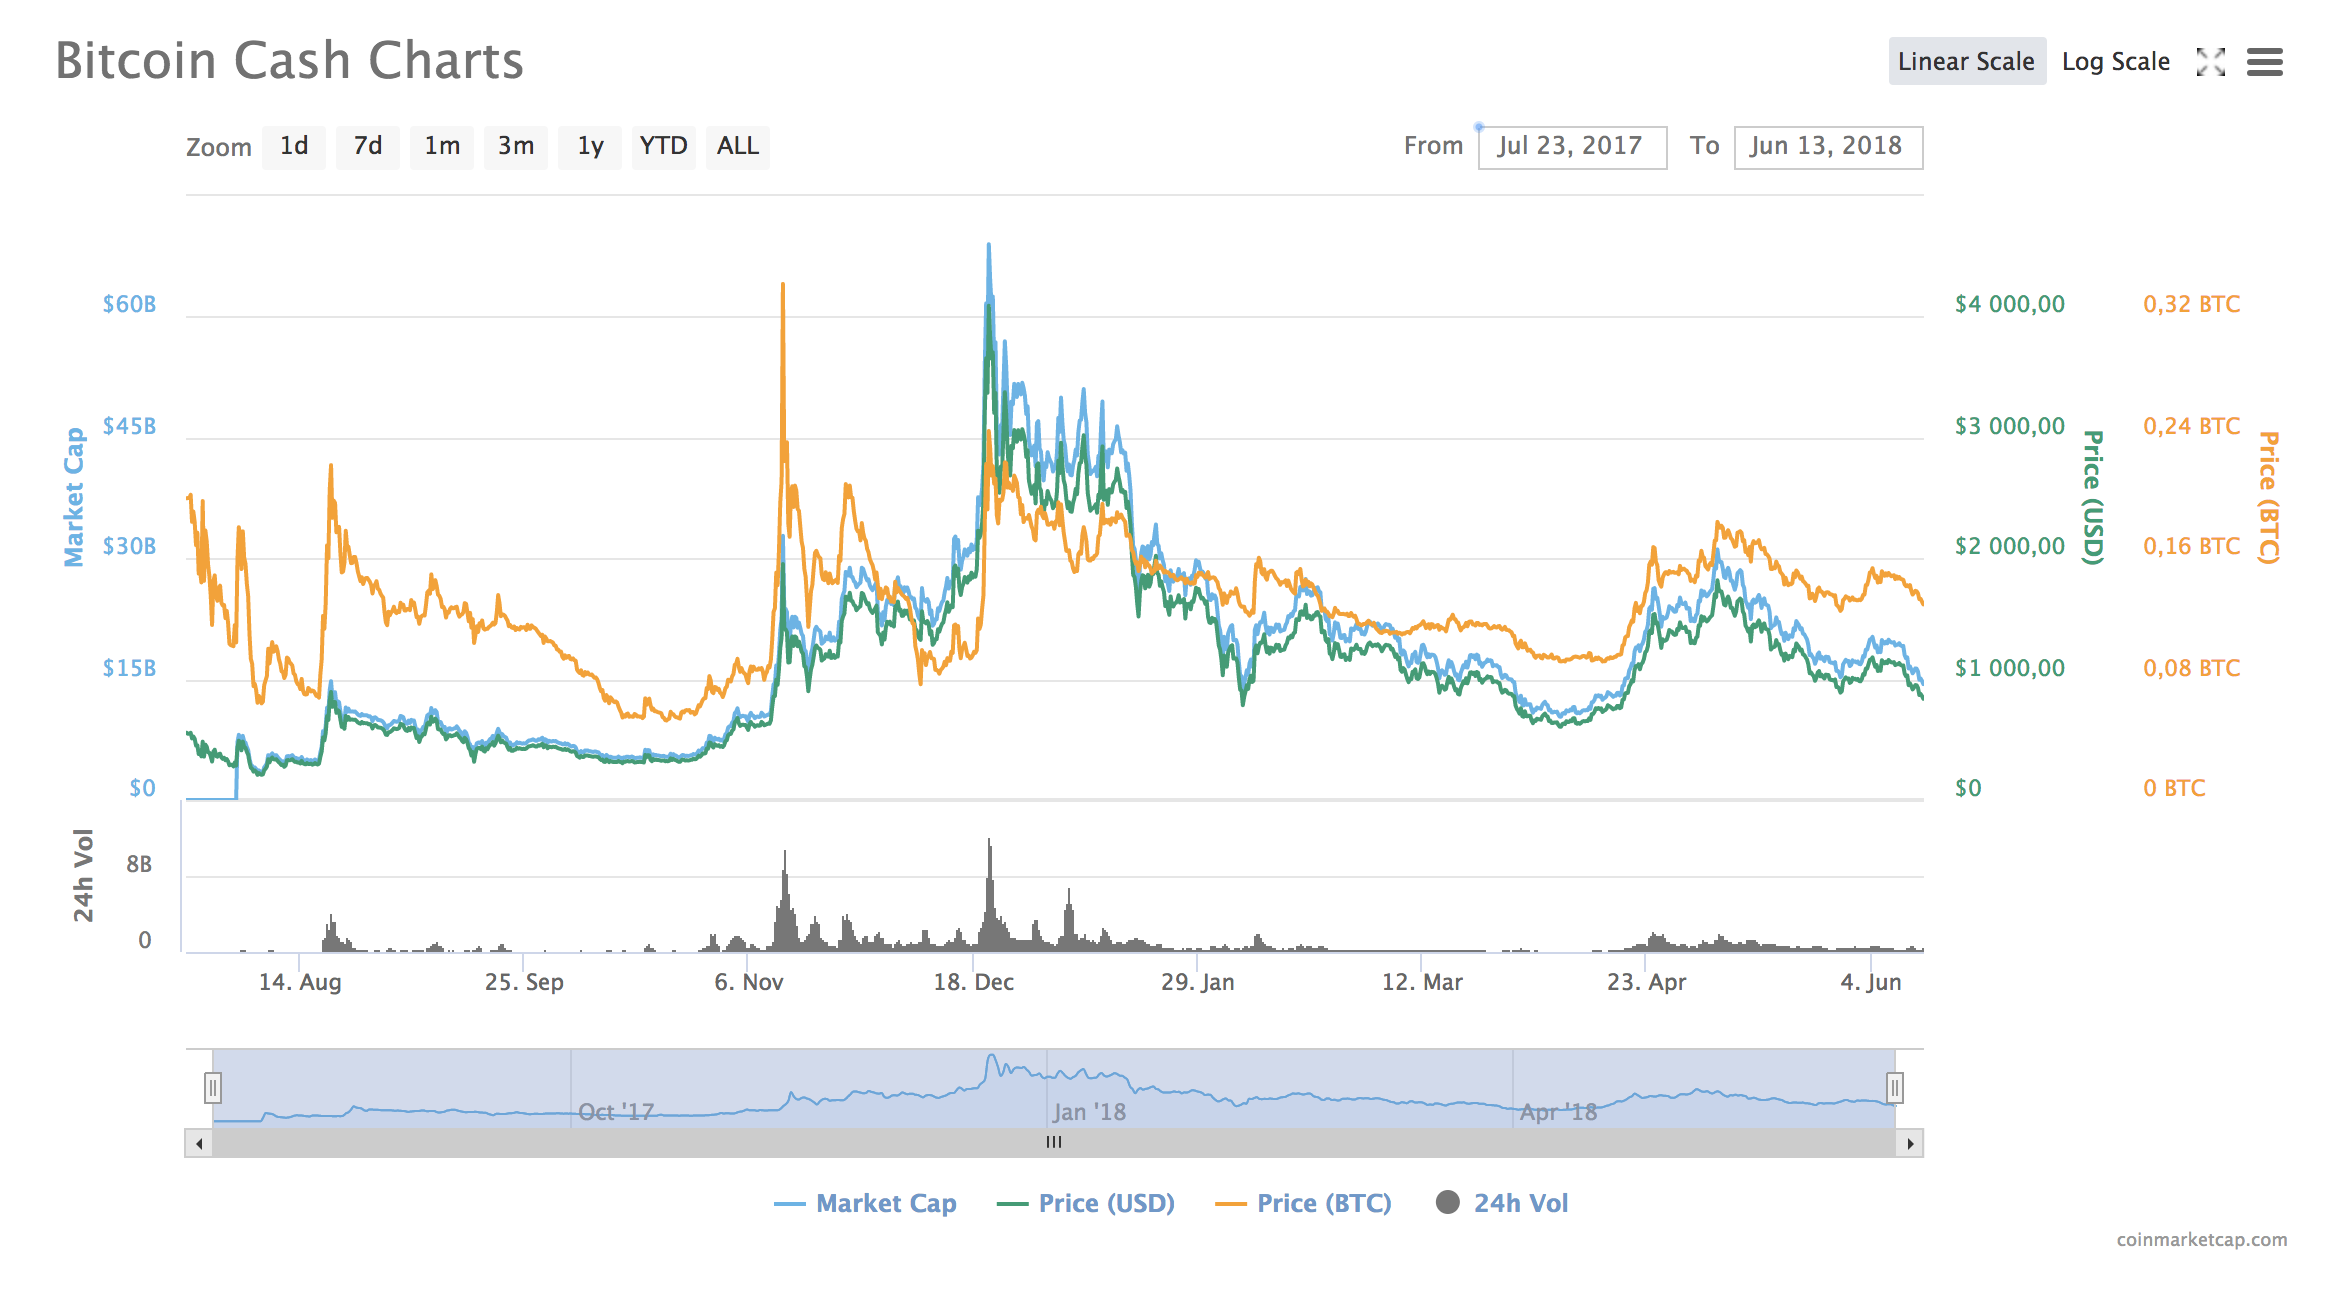 Bitcoin Cash price chart in USD 2017 TRASTRA